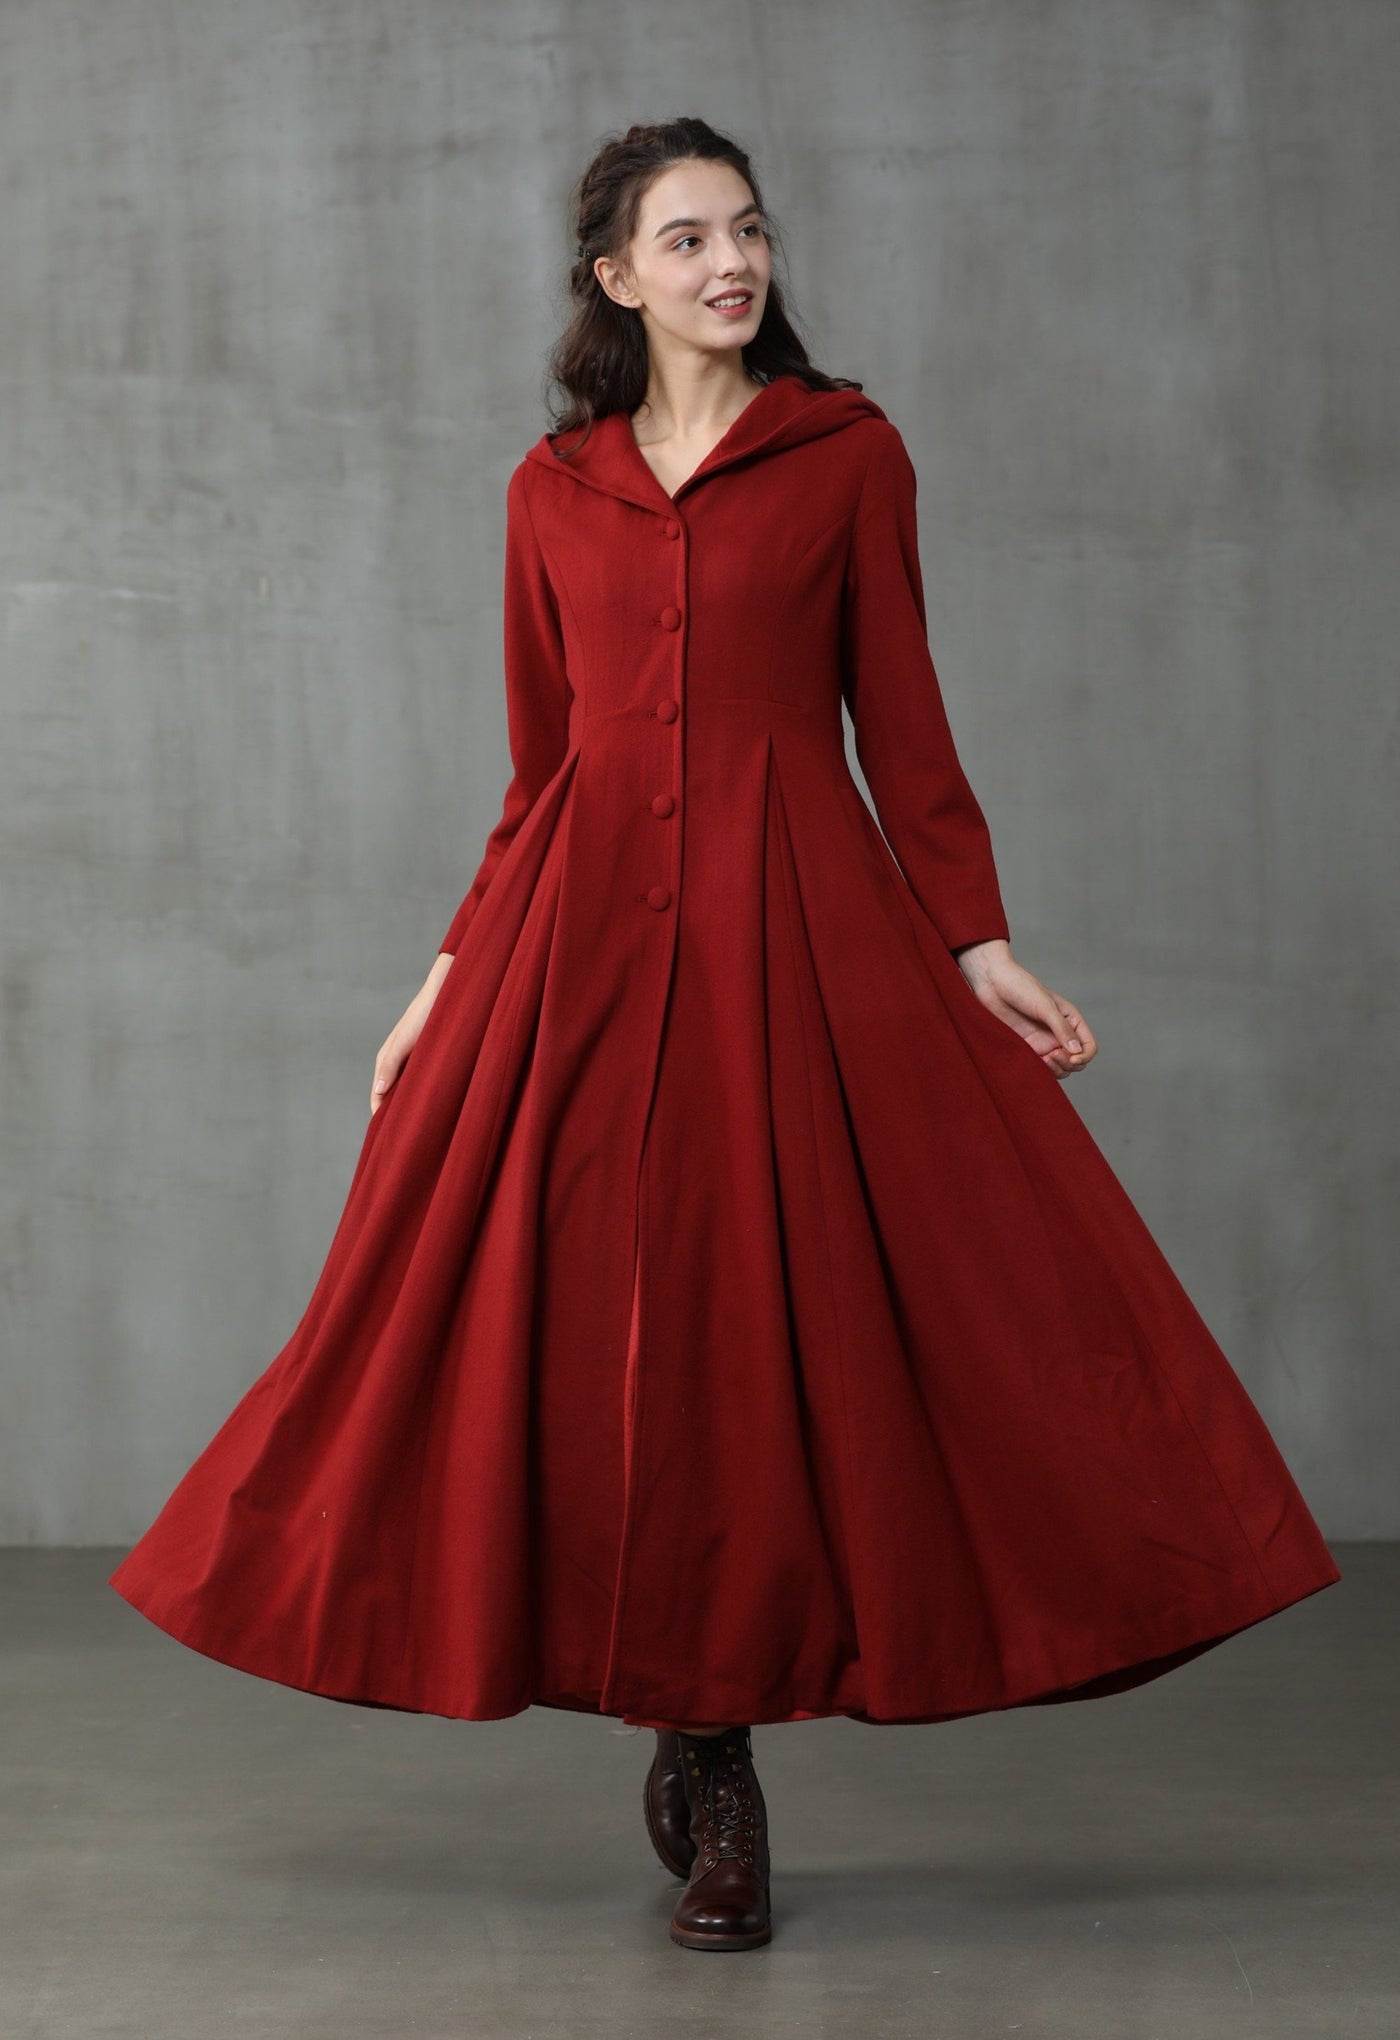 Medieval woman dress This custom-made, floor-length overcoat is mad...